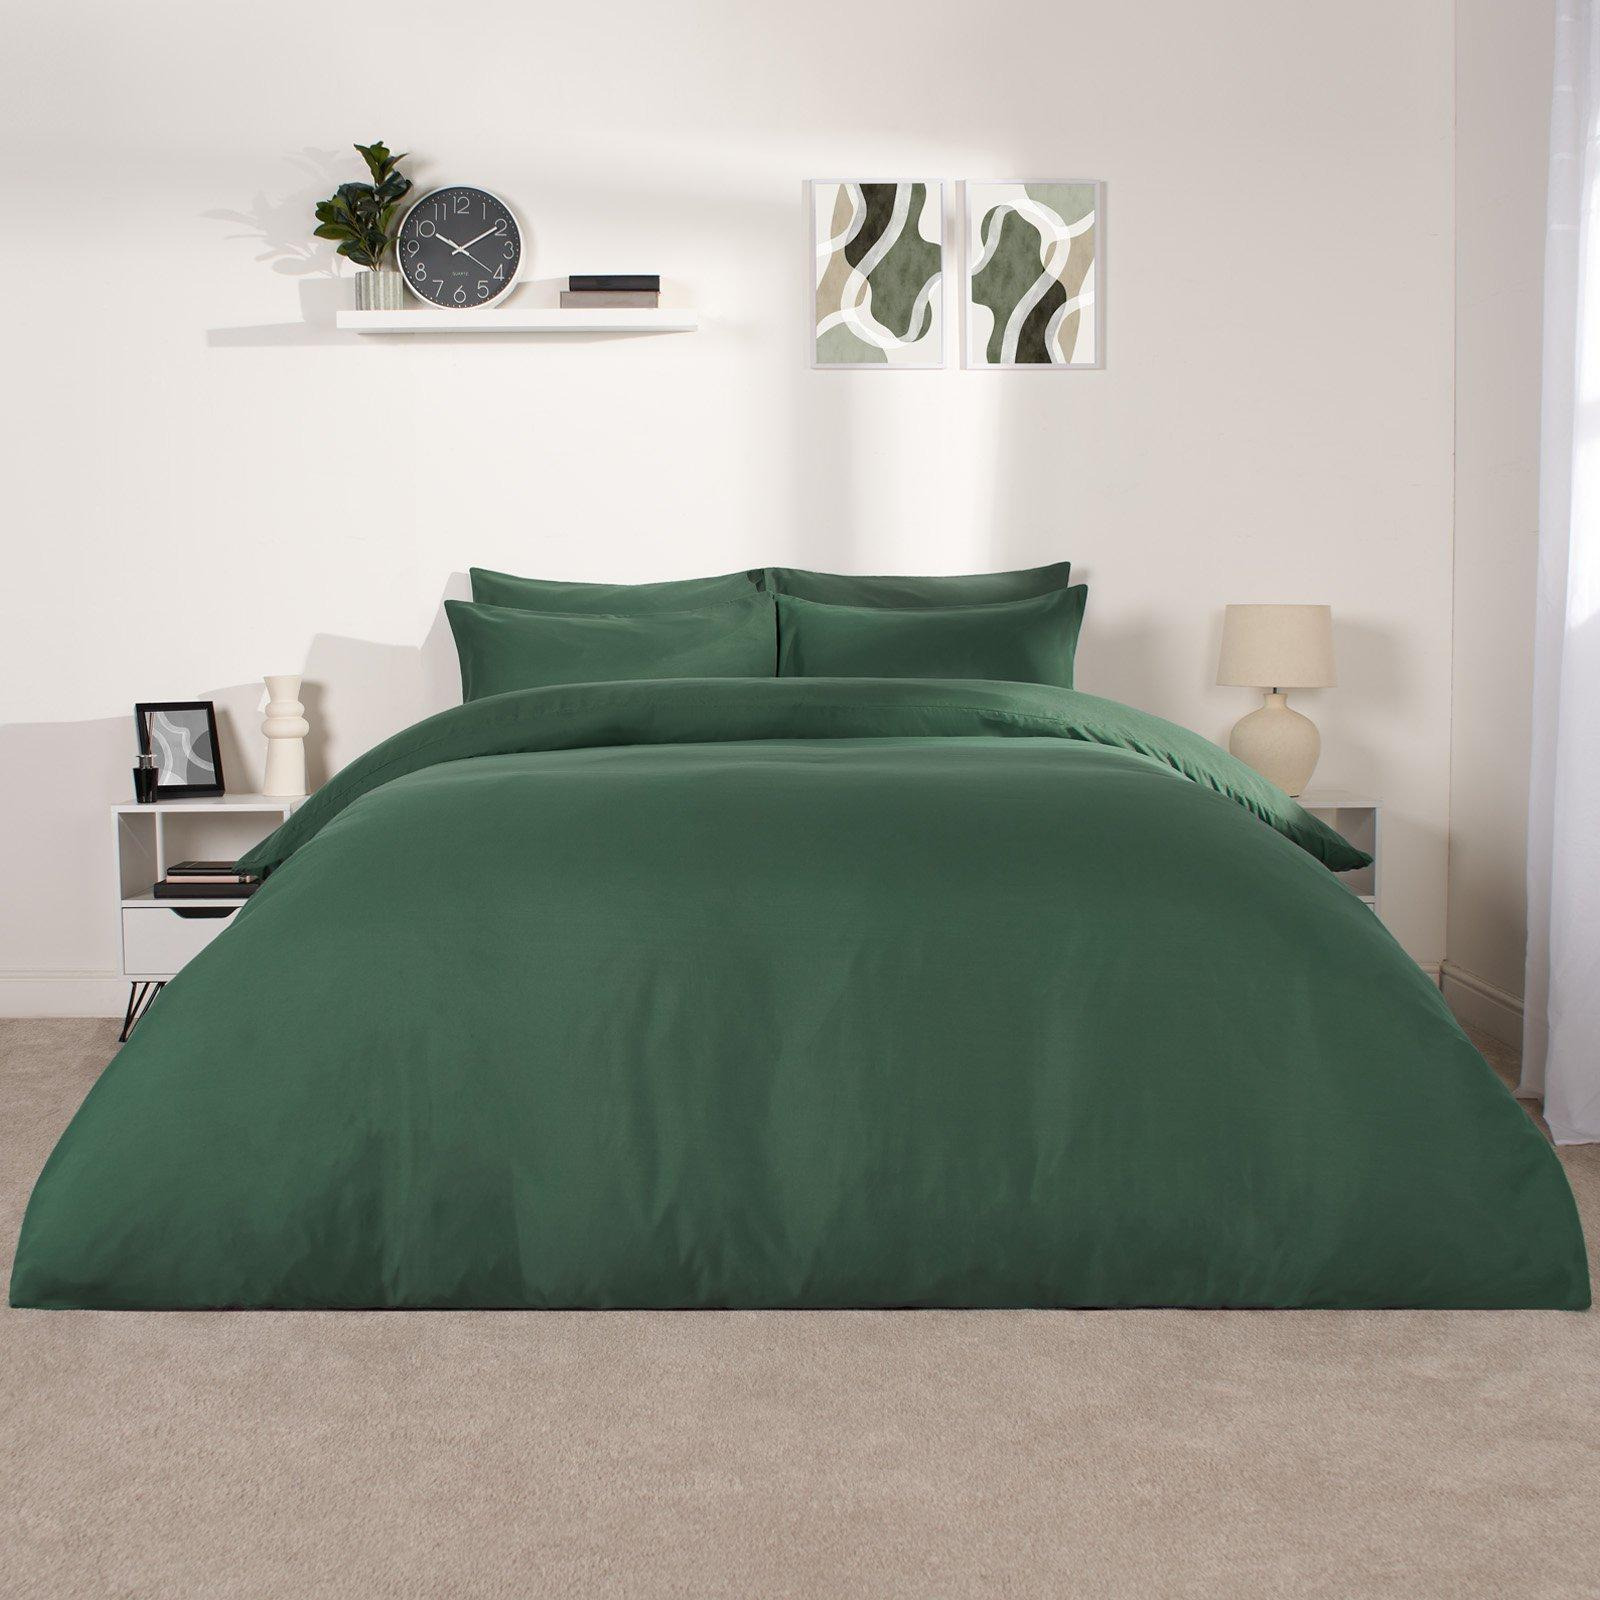 Plain Dyed Duvet Cover with Pillowcase Bedding Set - image 1